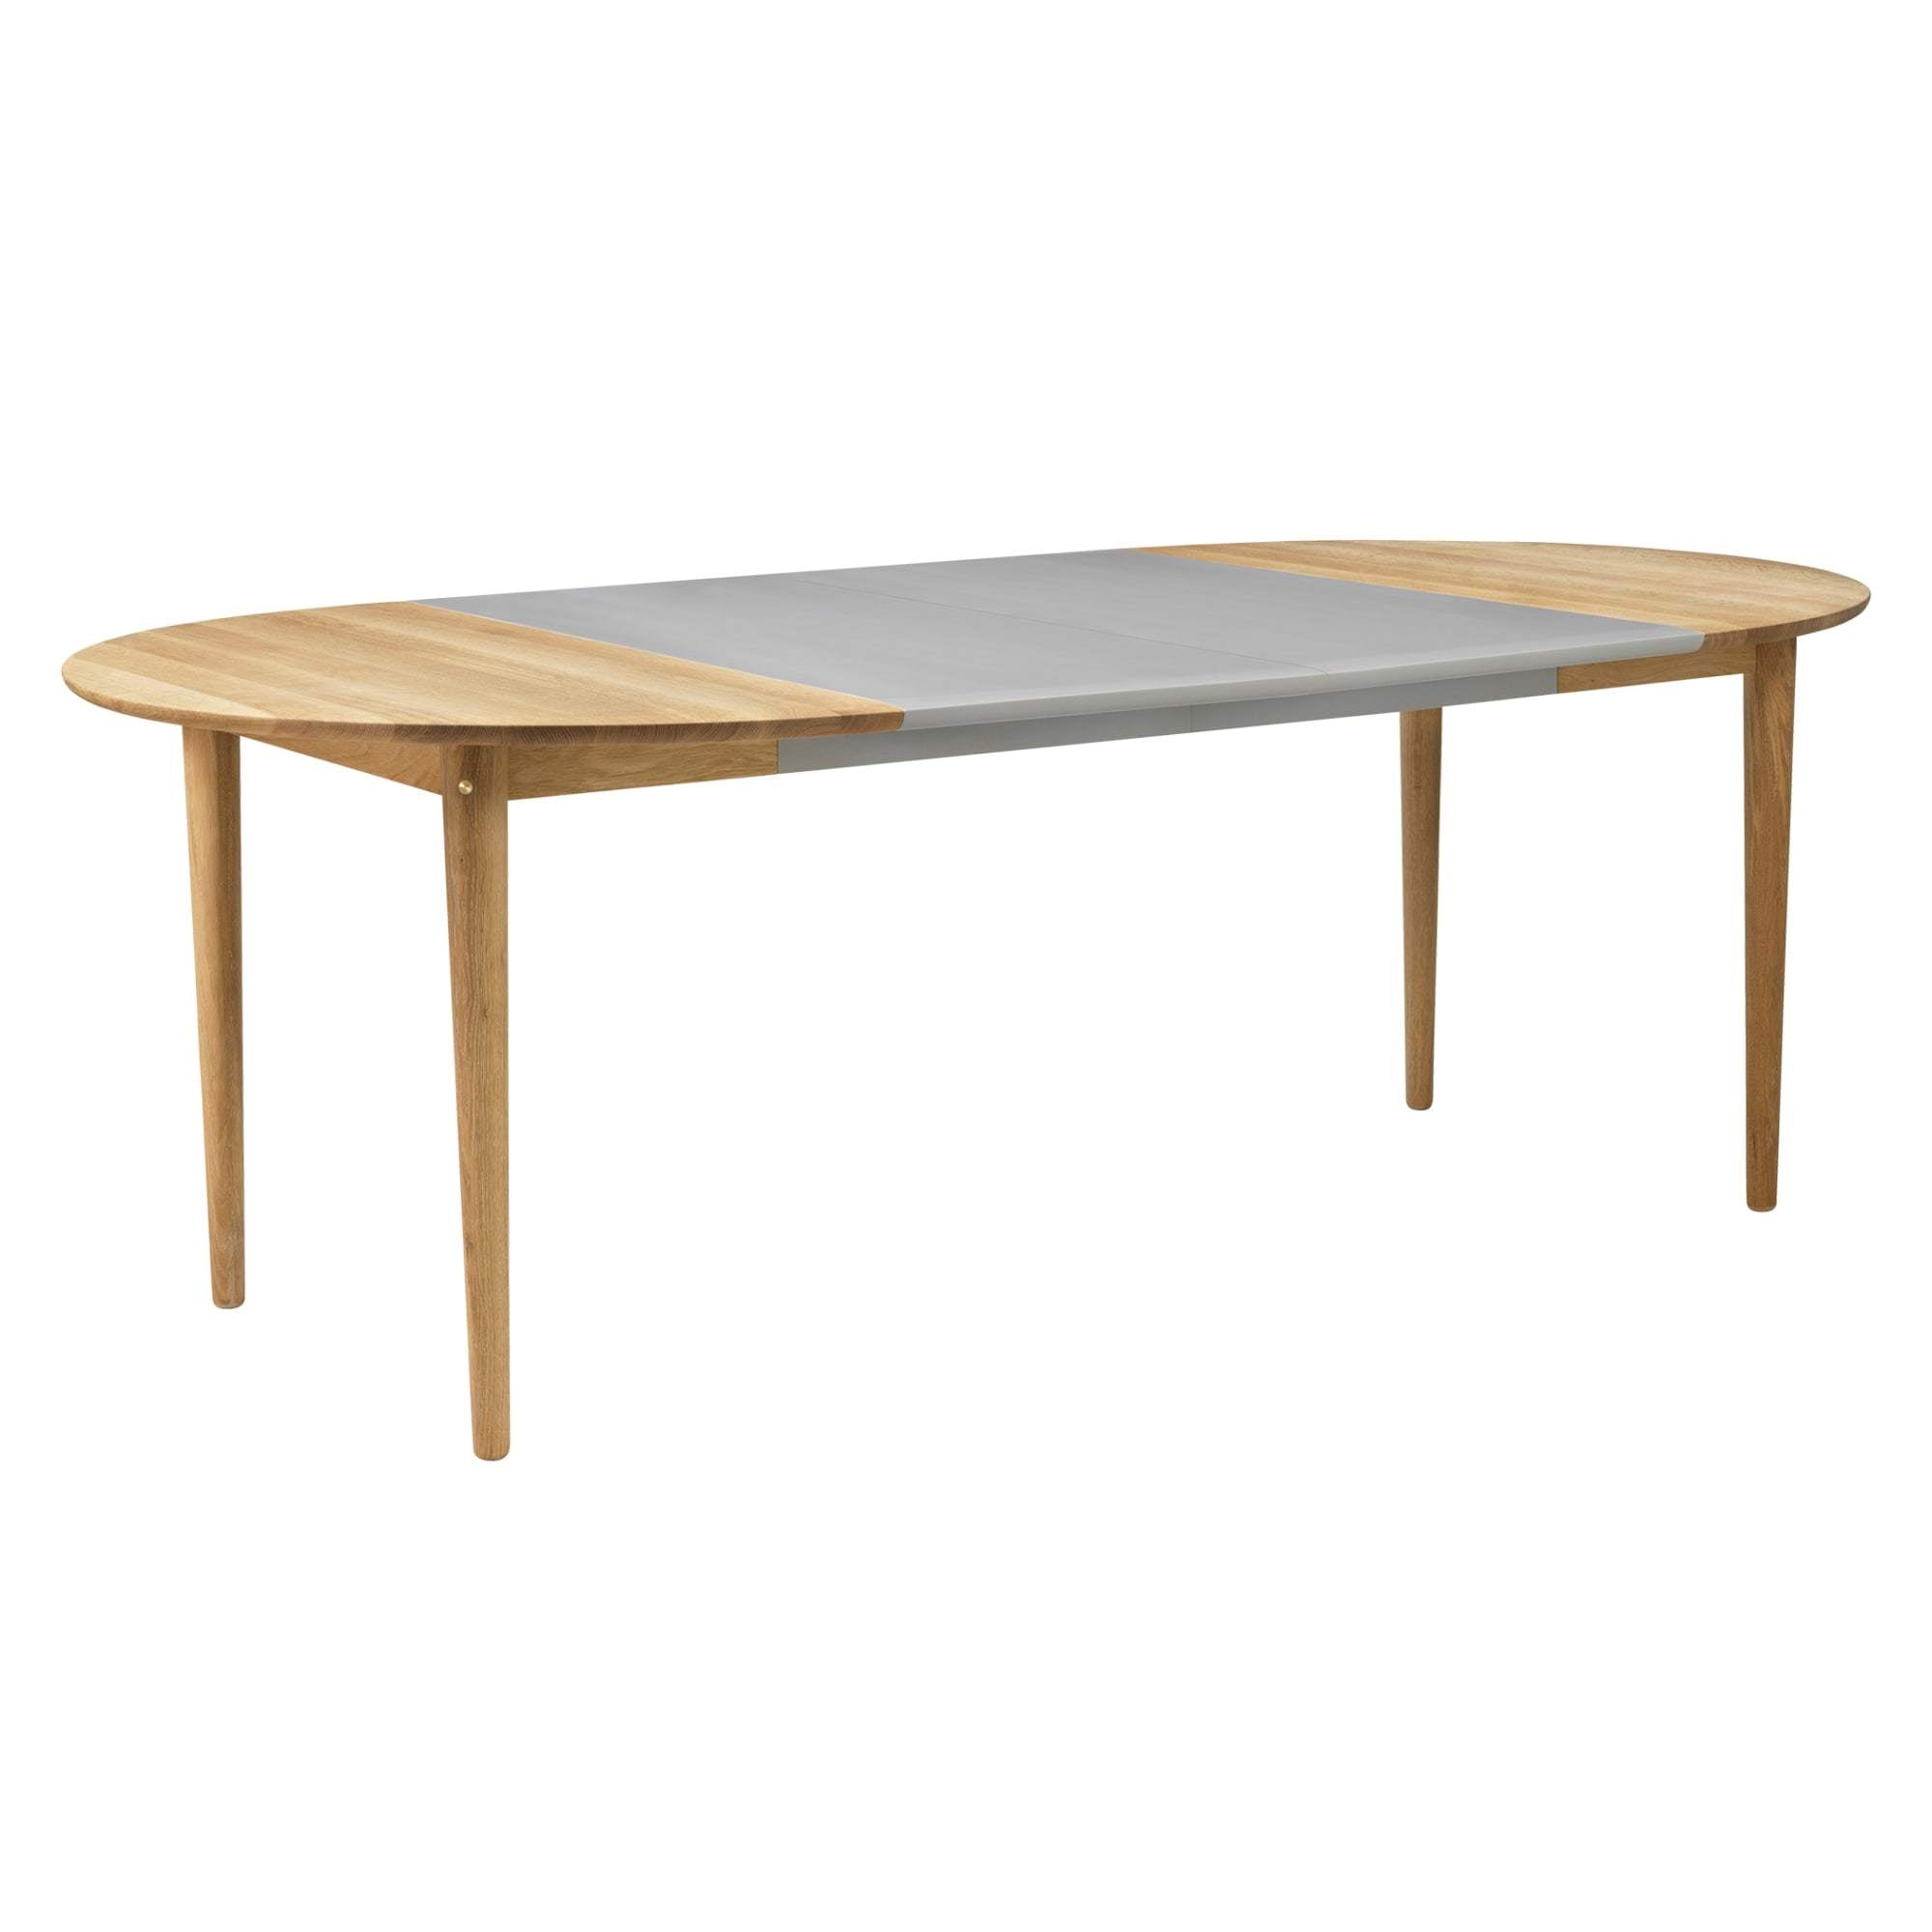 Fdb Møbler C62 E Dining Table With Pull Out Function, Oak